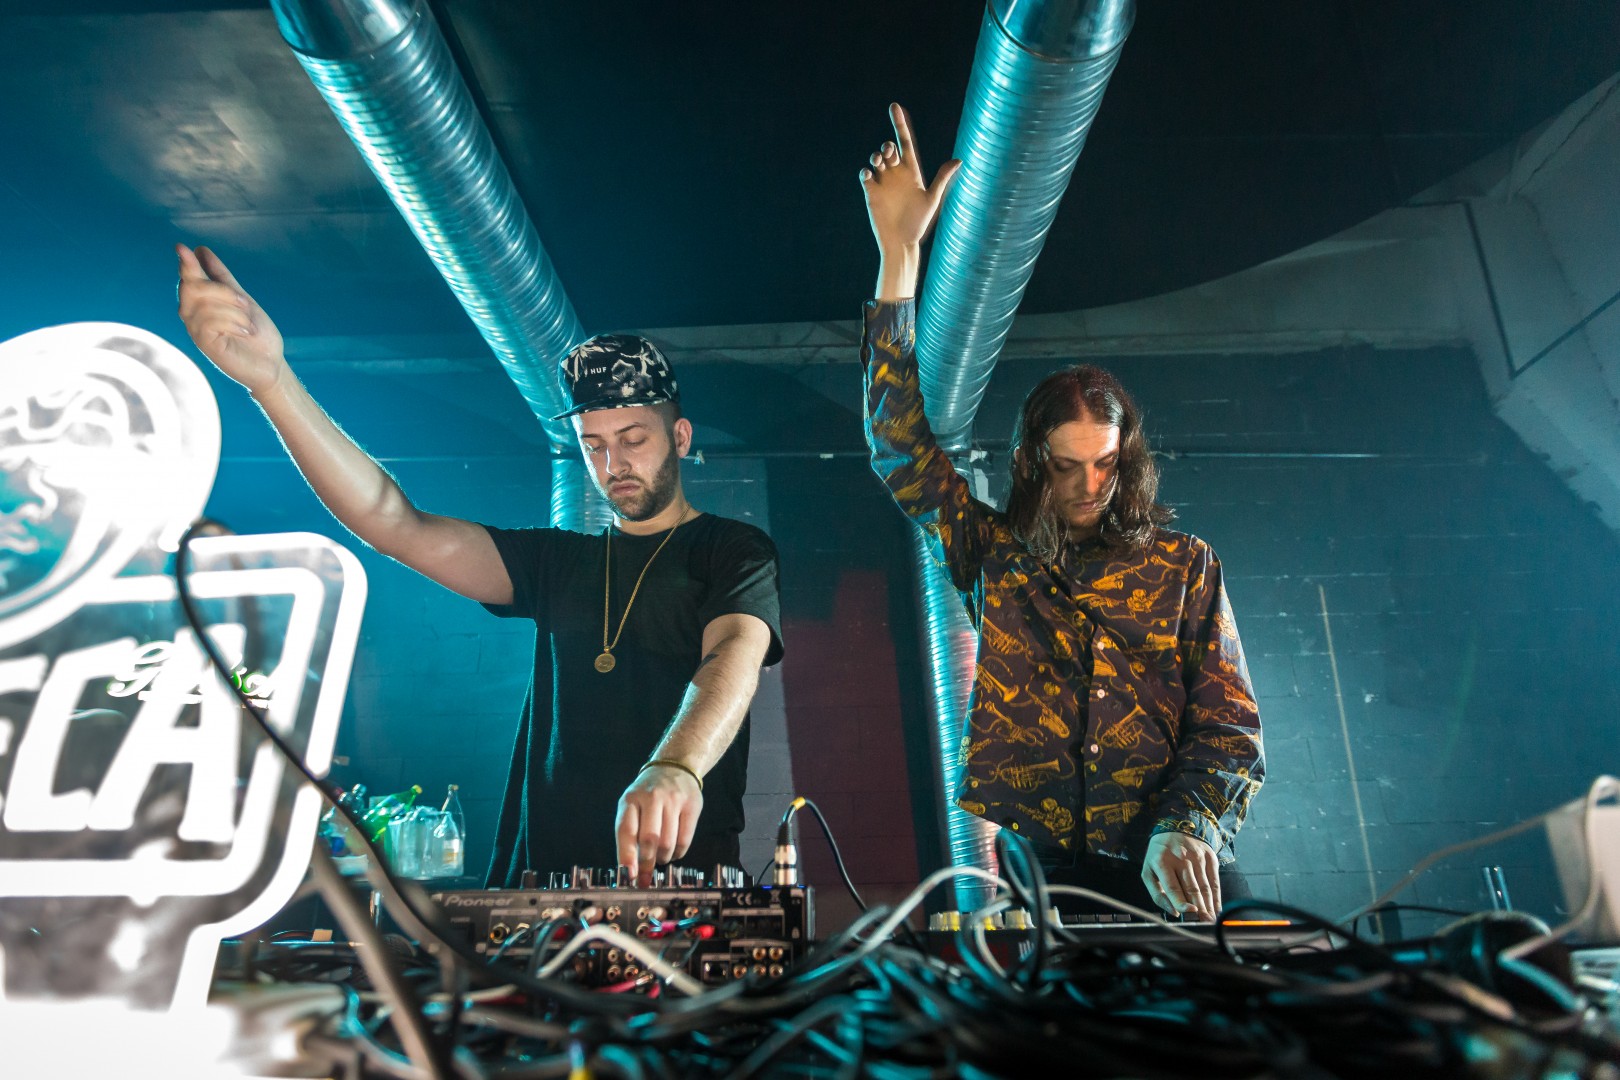 Zeds Dead at Fusion Arena in Bucharest on July 20, 2014 (9c8a5e730f)